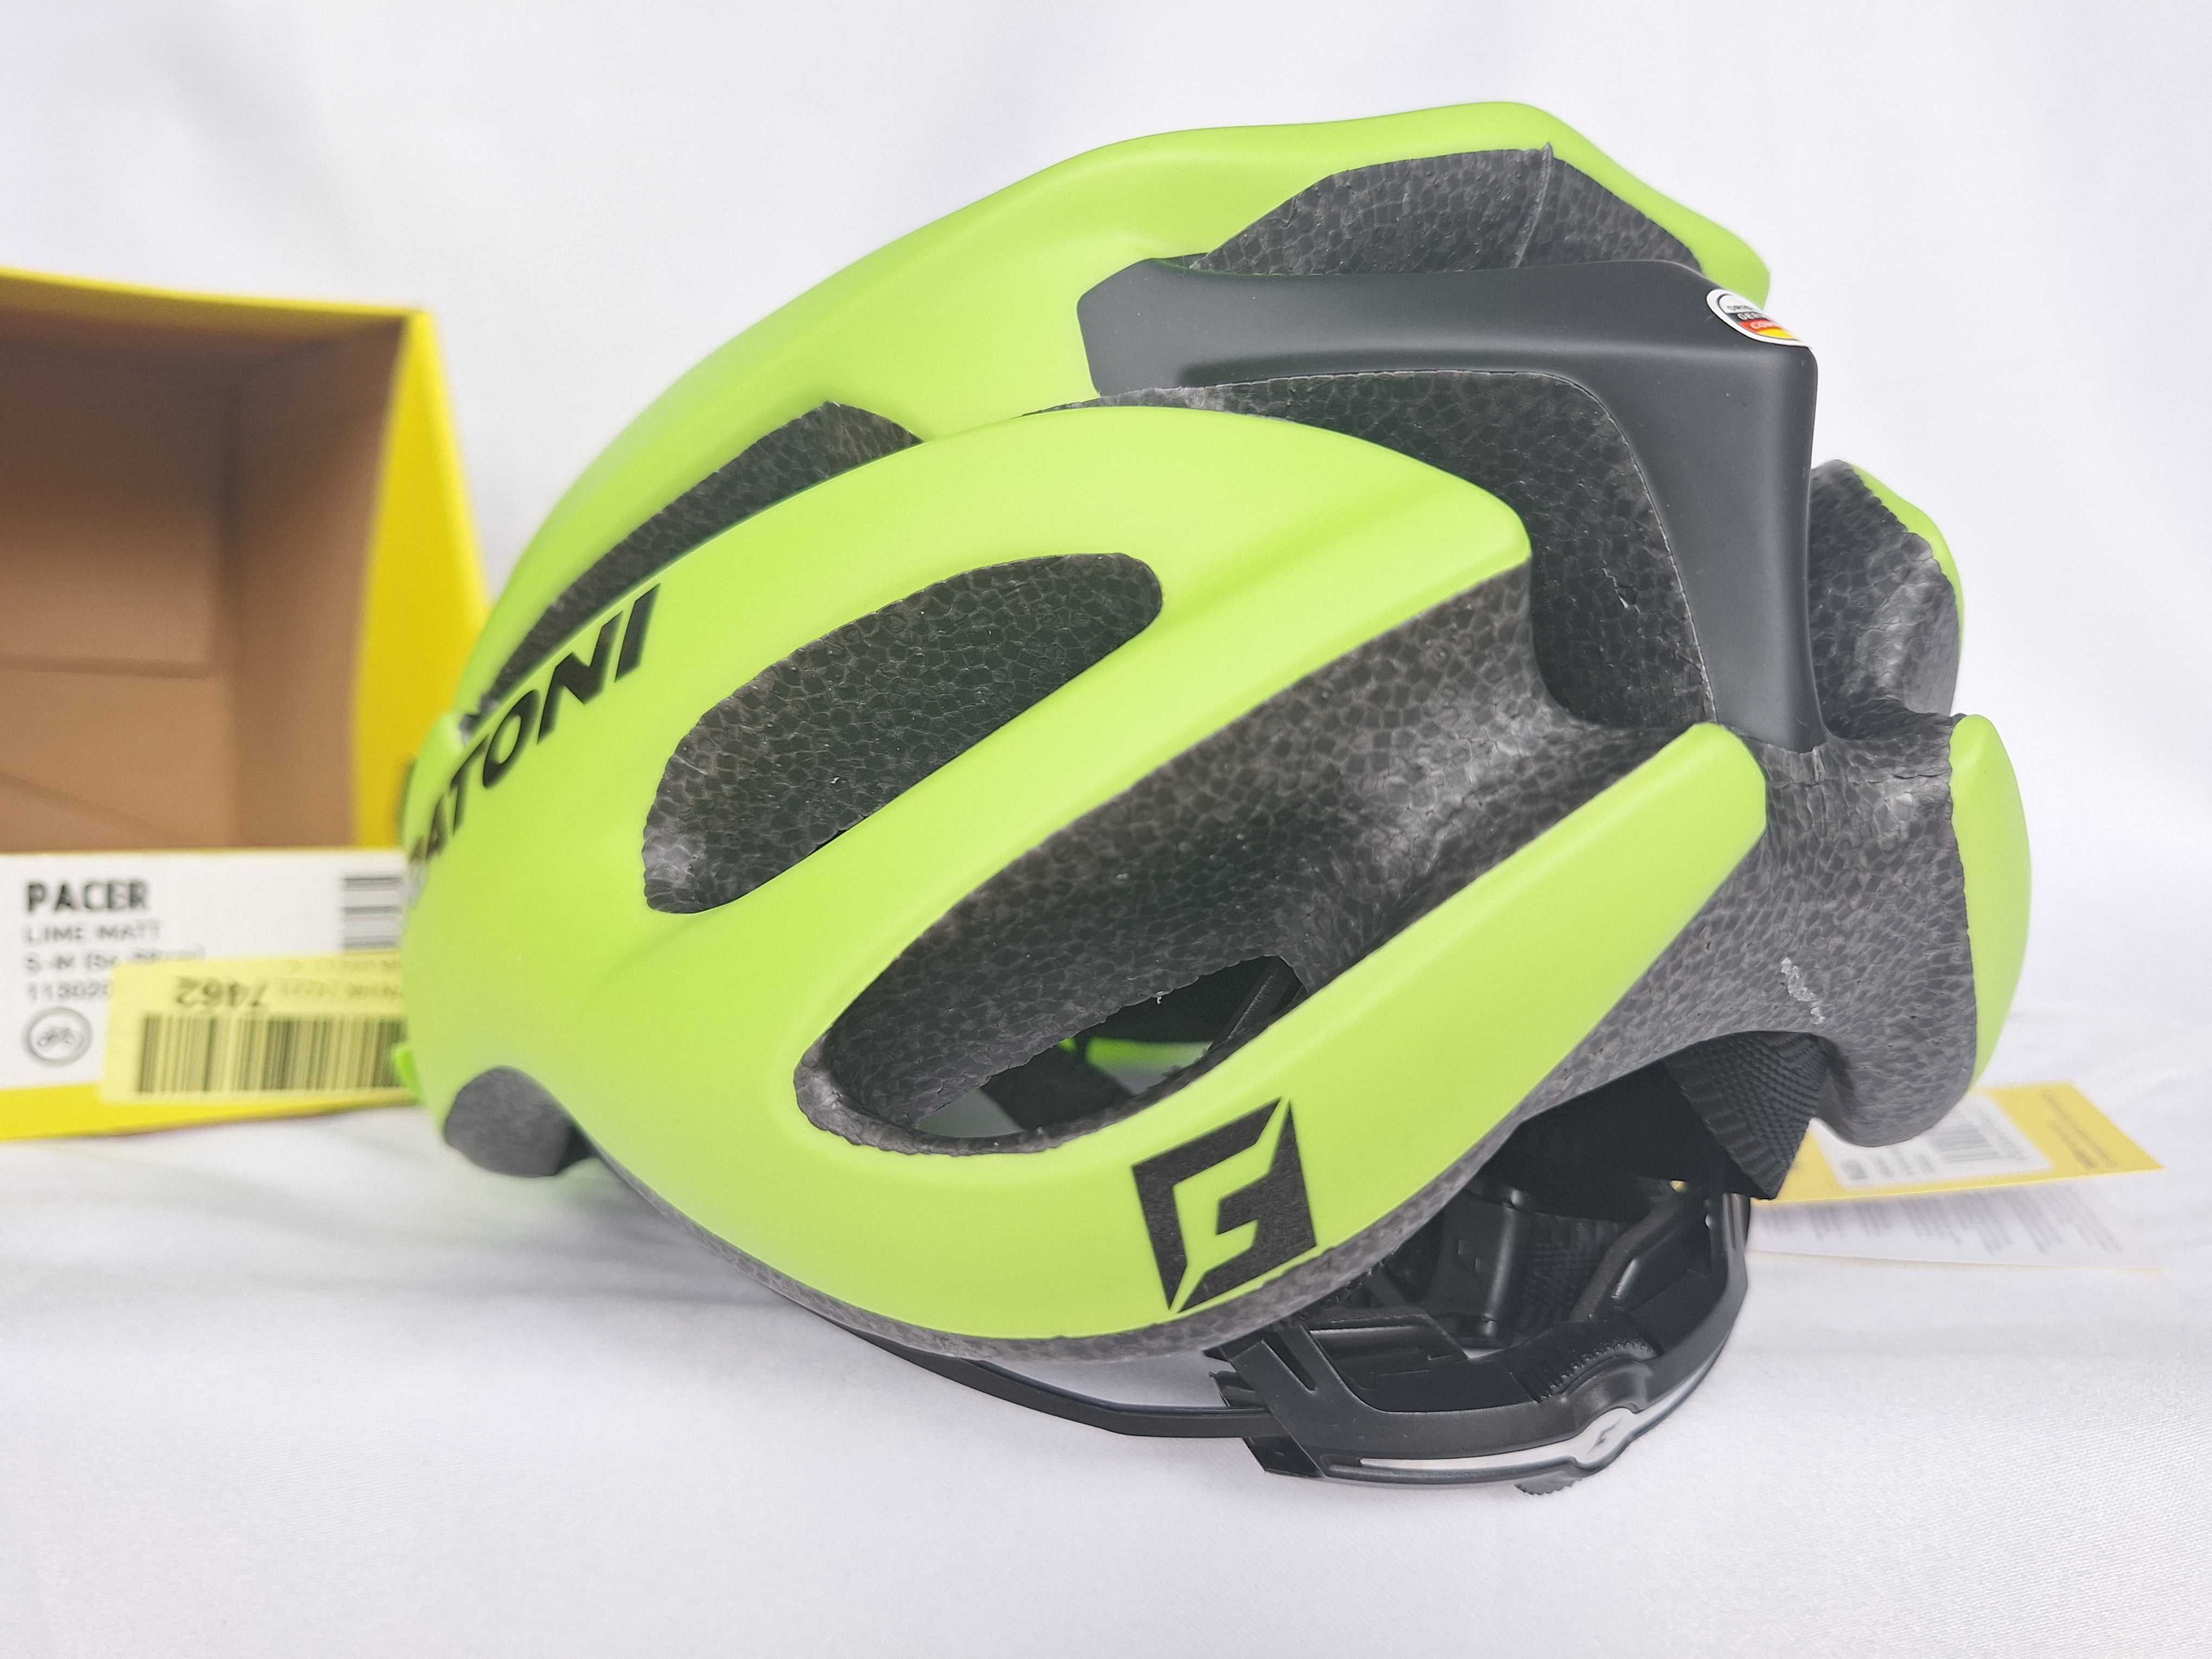 Kask rowerowy Cratoni Pacer Lime Matt S/M 54-58cm